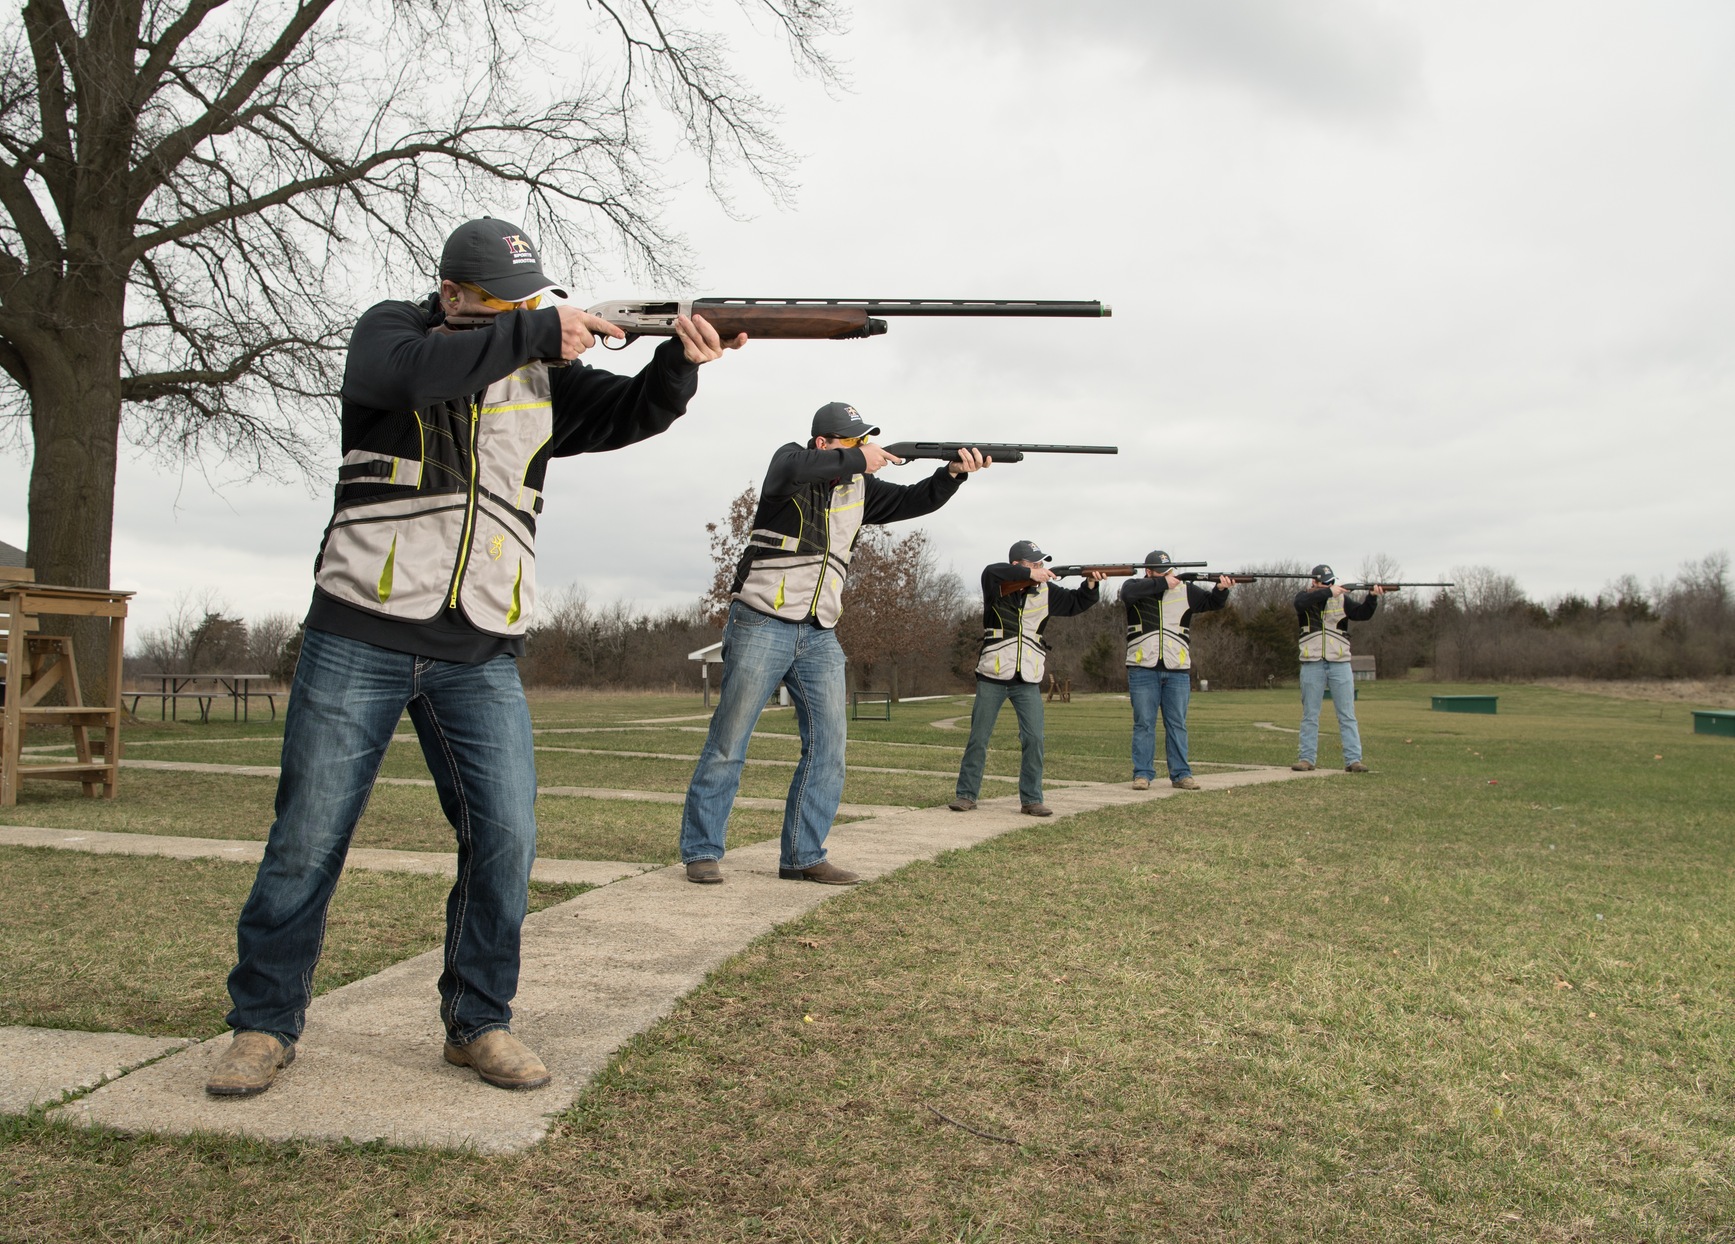 Sports shooting Team lined up to shoot